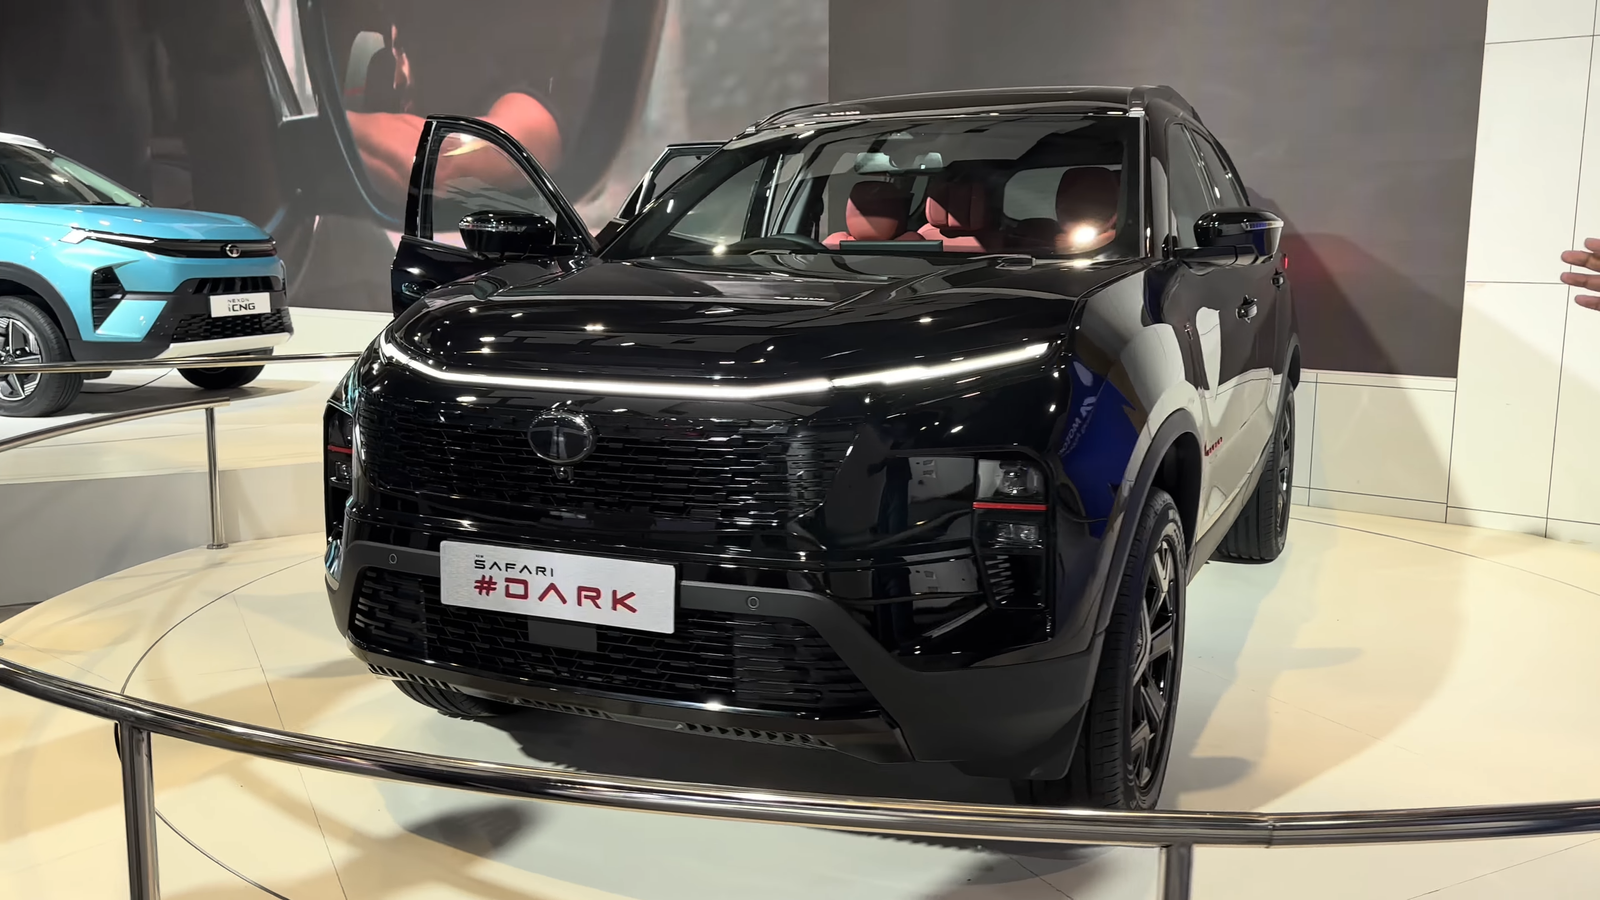 Tata Safari ride now in a new style!  New Tata Safari Dark Edition revealed... Know the price only